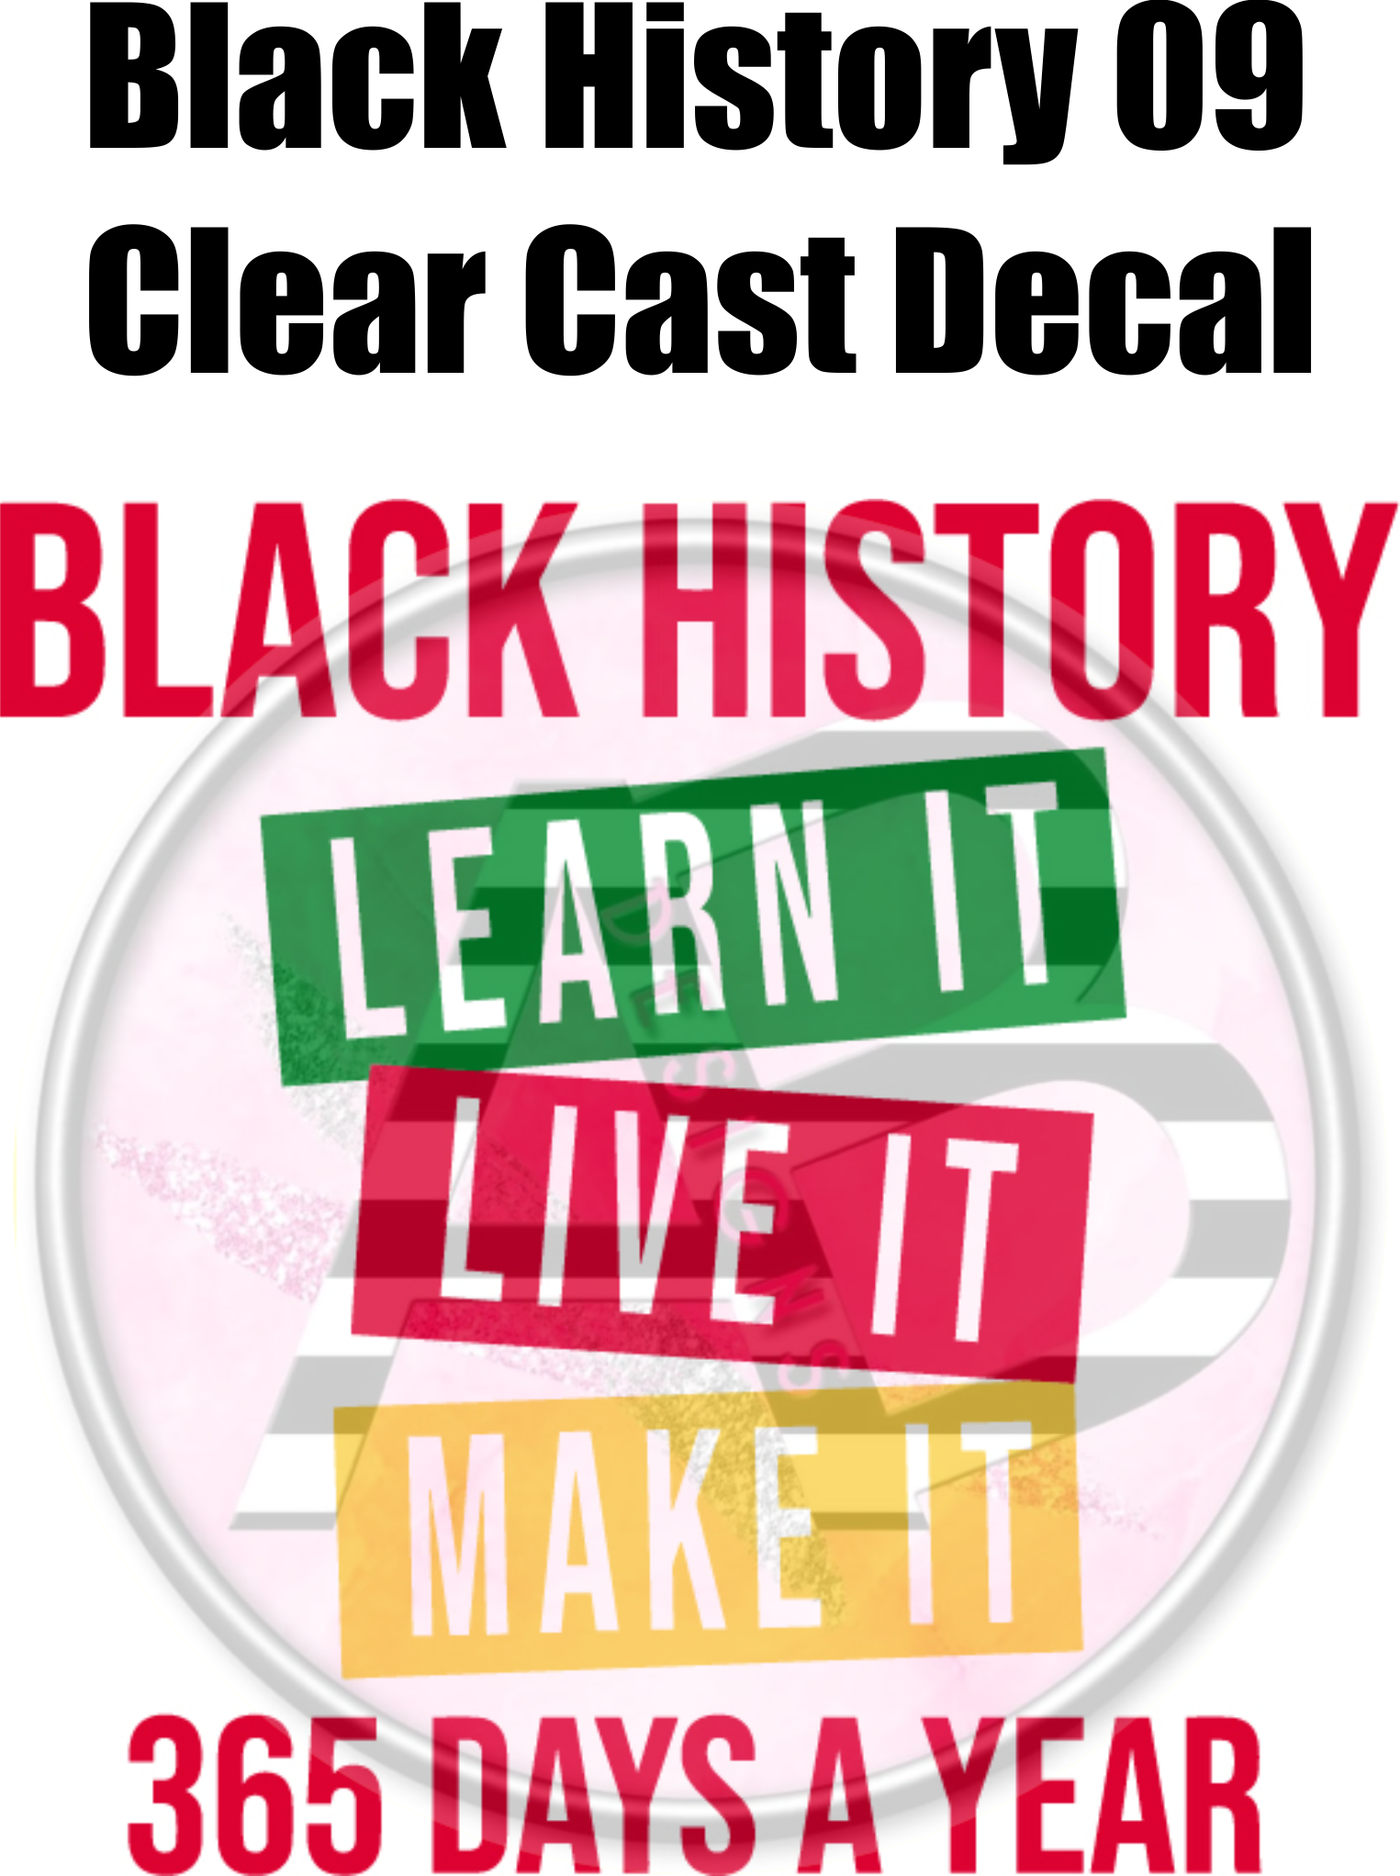 Black History 09 - Clear Cast Decal